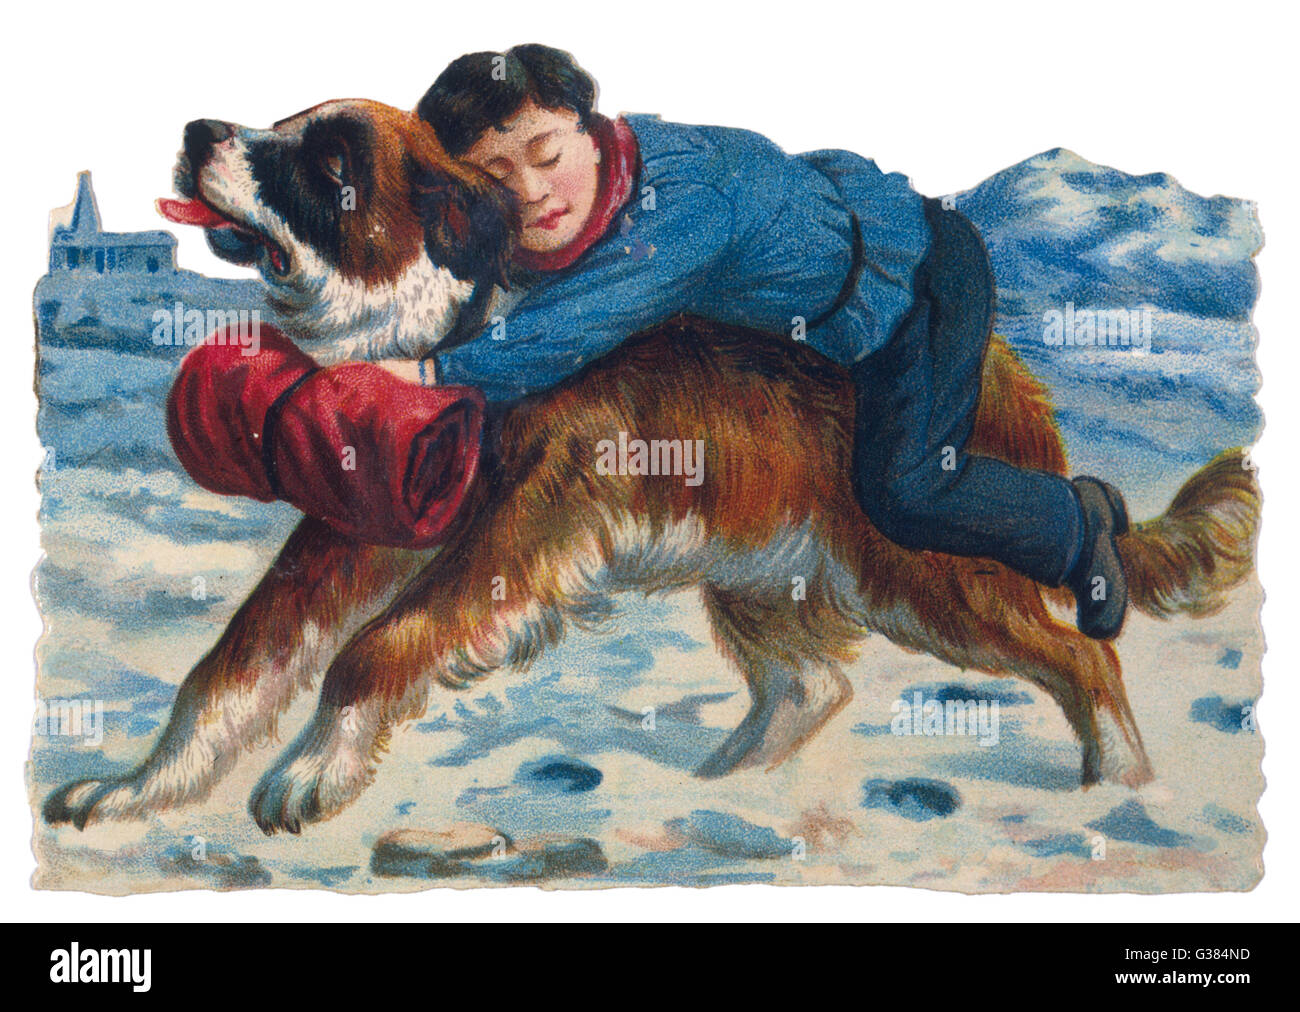 A Saint Bernard rescues  a boy from an icy death        Date: late 19th century Stock Photo